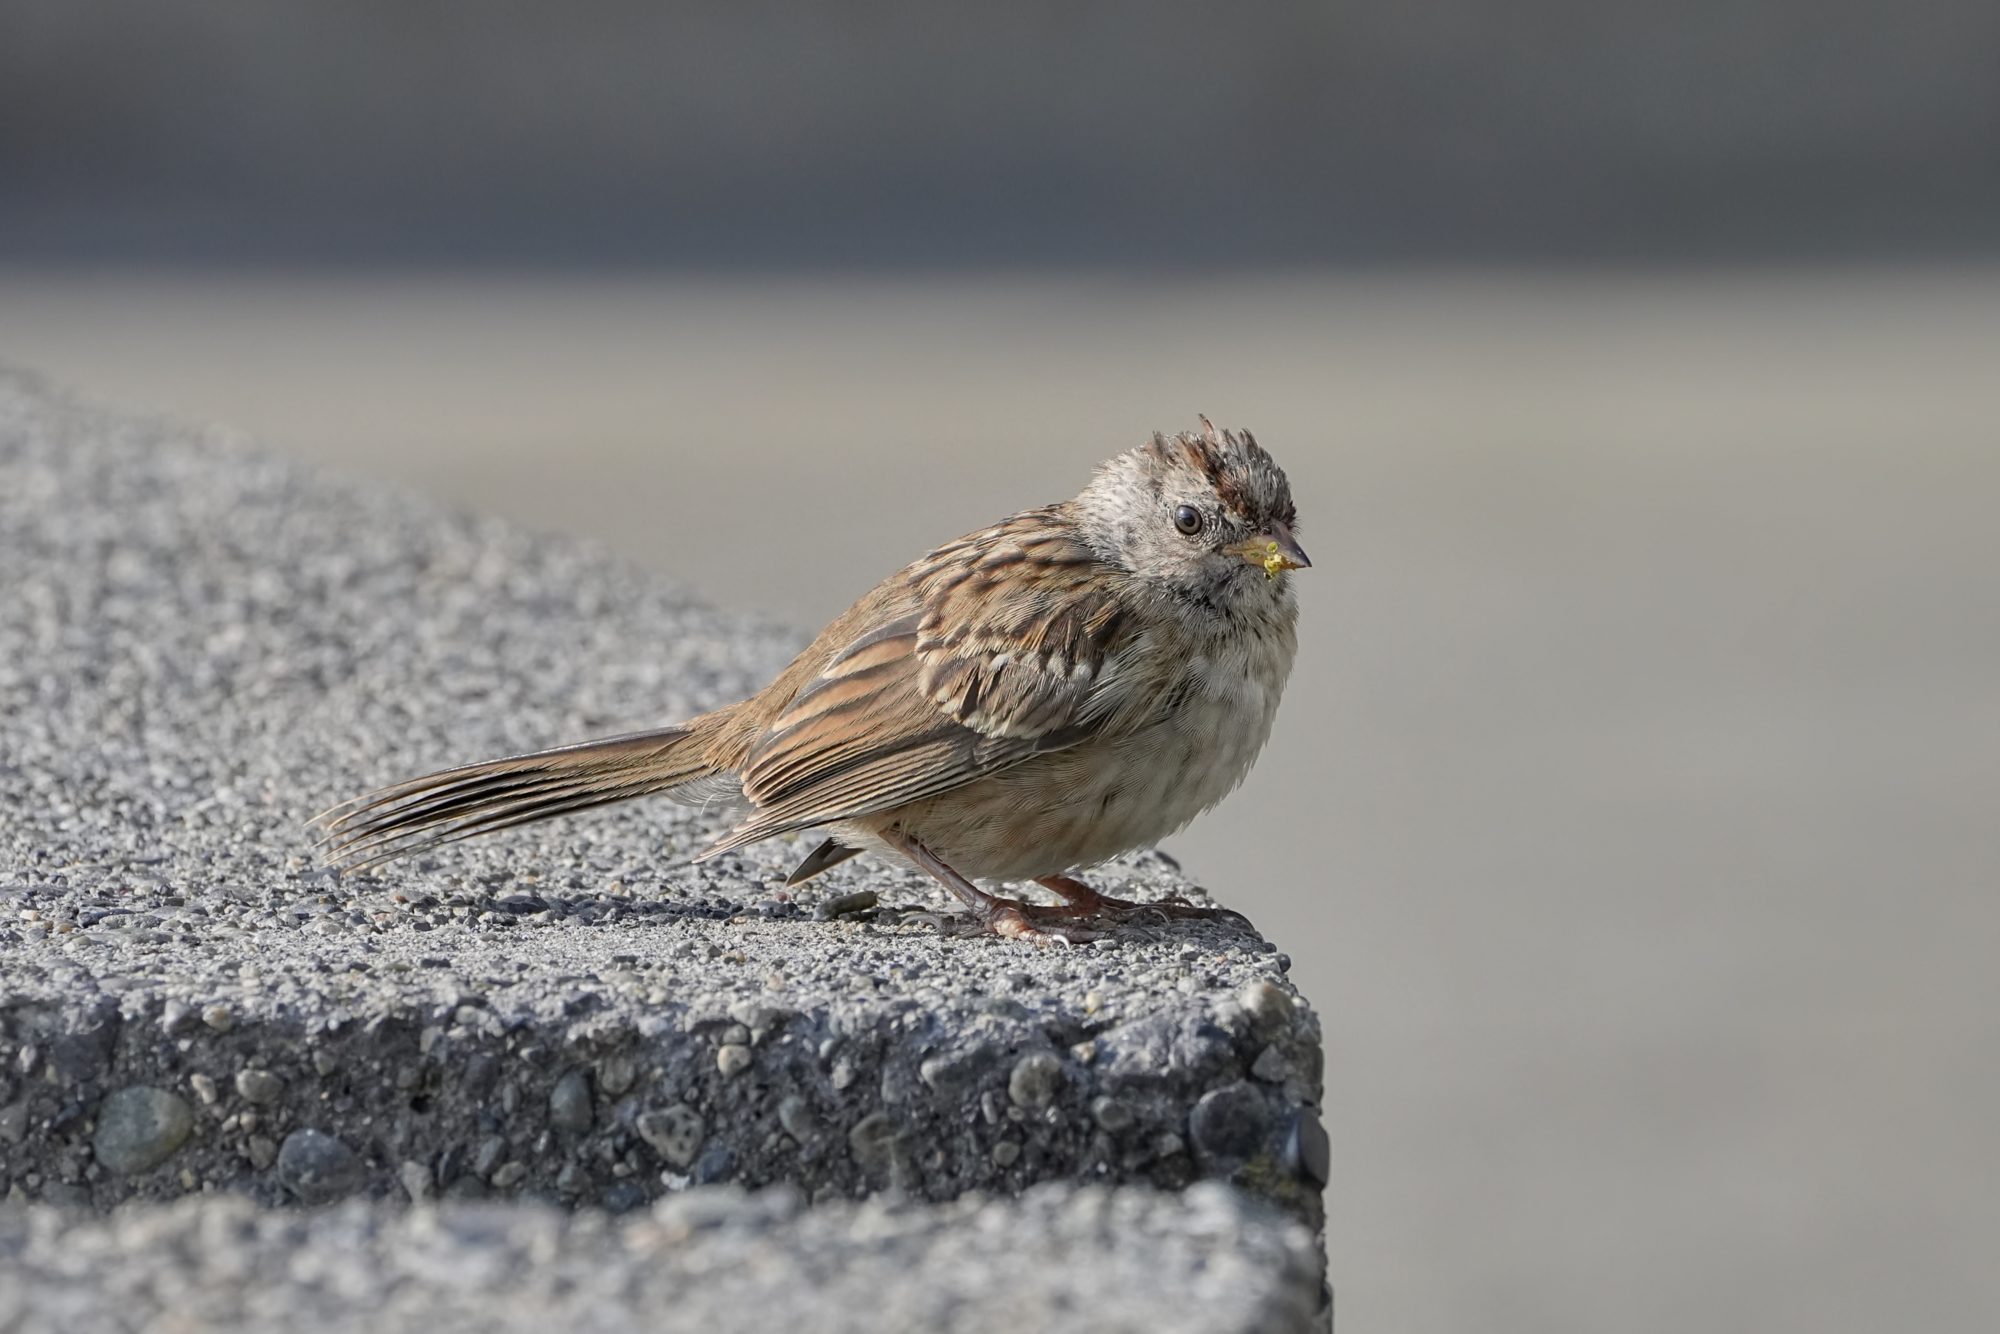 An immature White-crowned Sparrow is on a concrete bench in a park